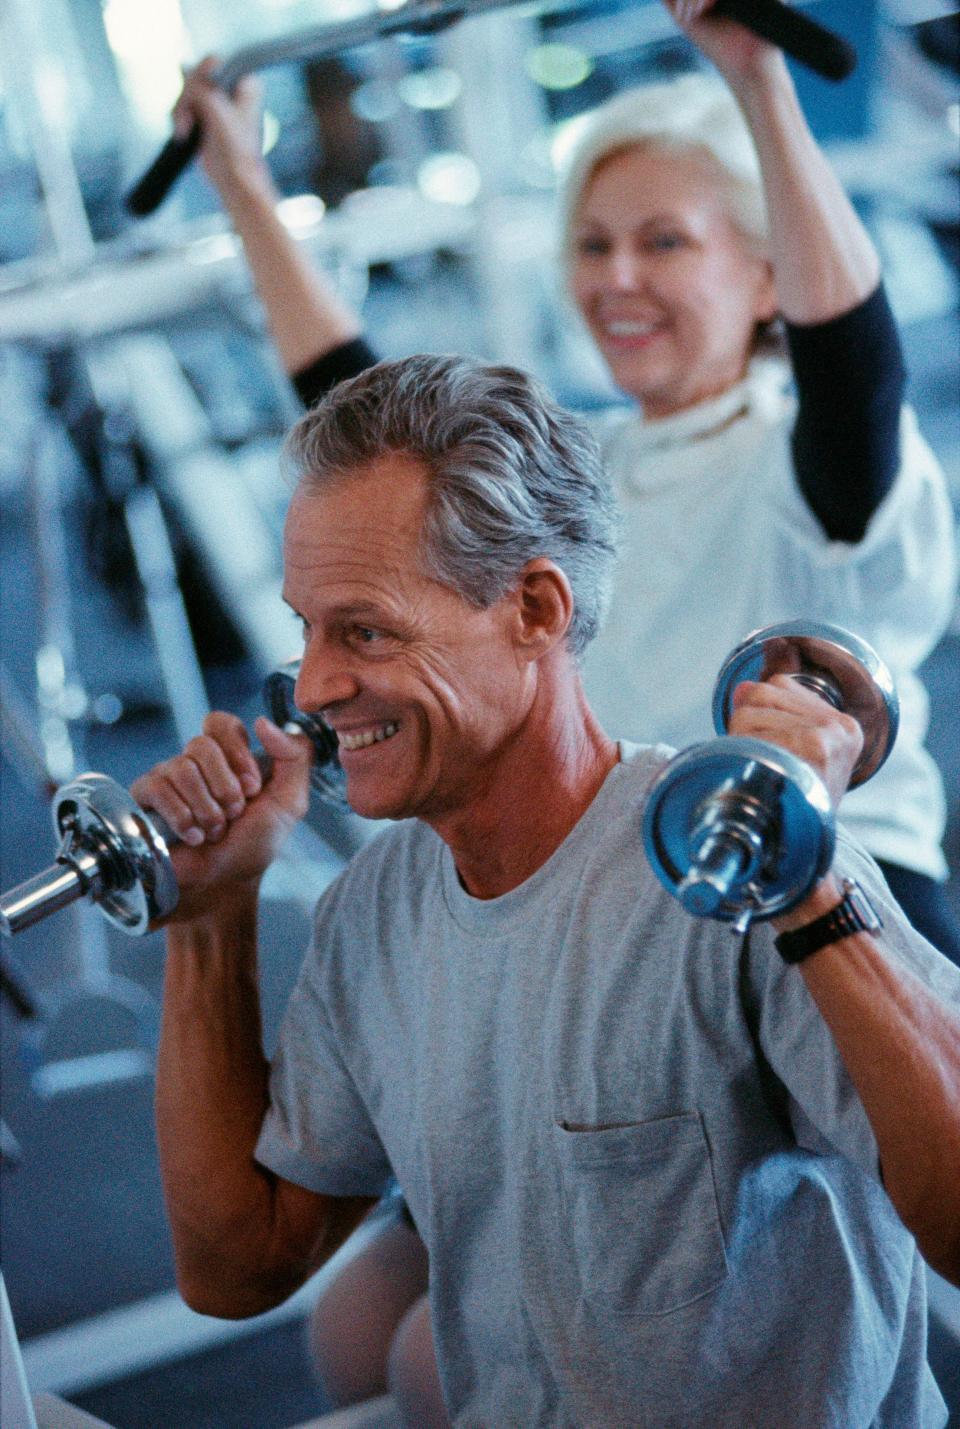 Resistance training can help hold on to muscle mass as we age.